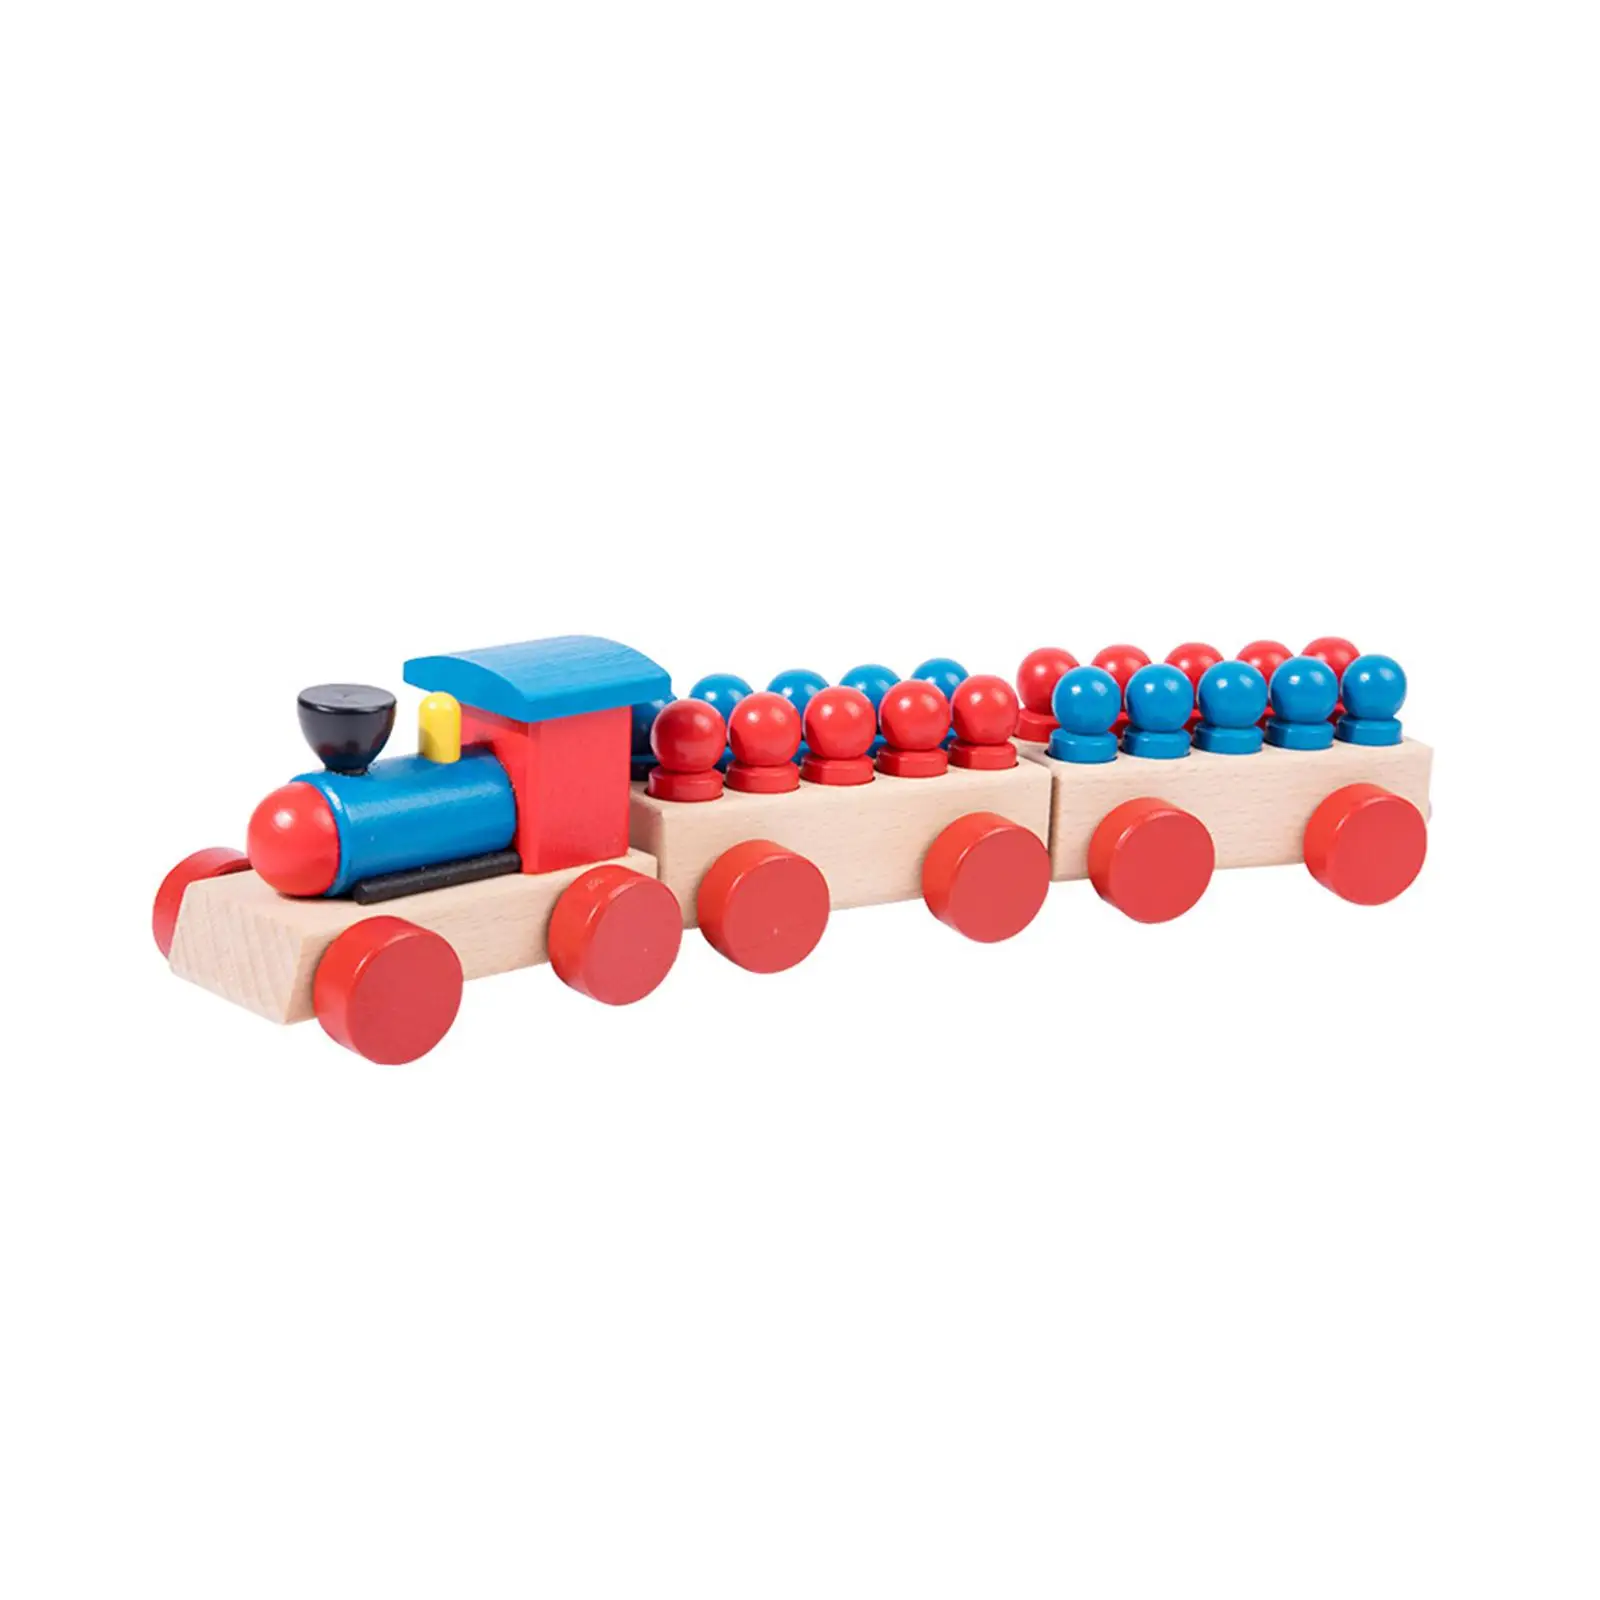 Wooden Train Toddlers Toys Pull Train Countinng Games Teaching Aids for Baby Boys Girls 1 2 3 Year Old Kids Birthday Gift